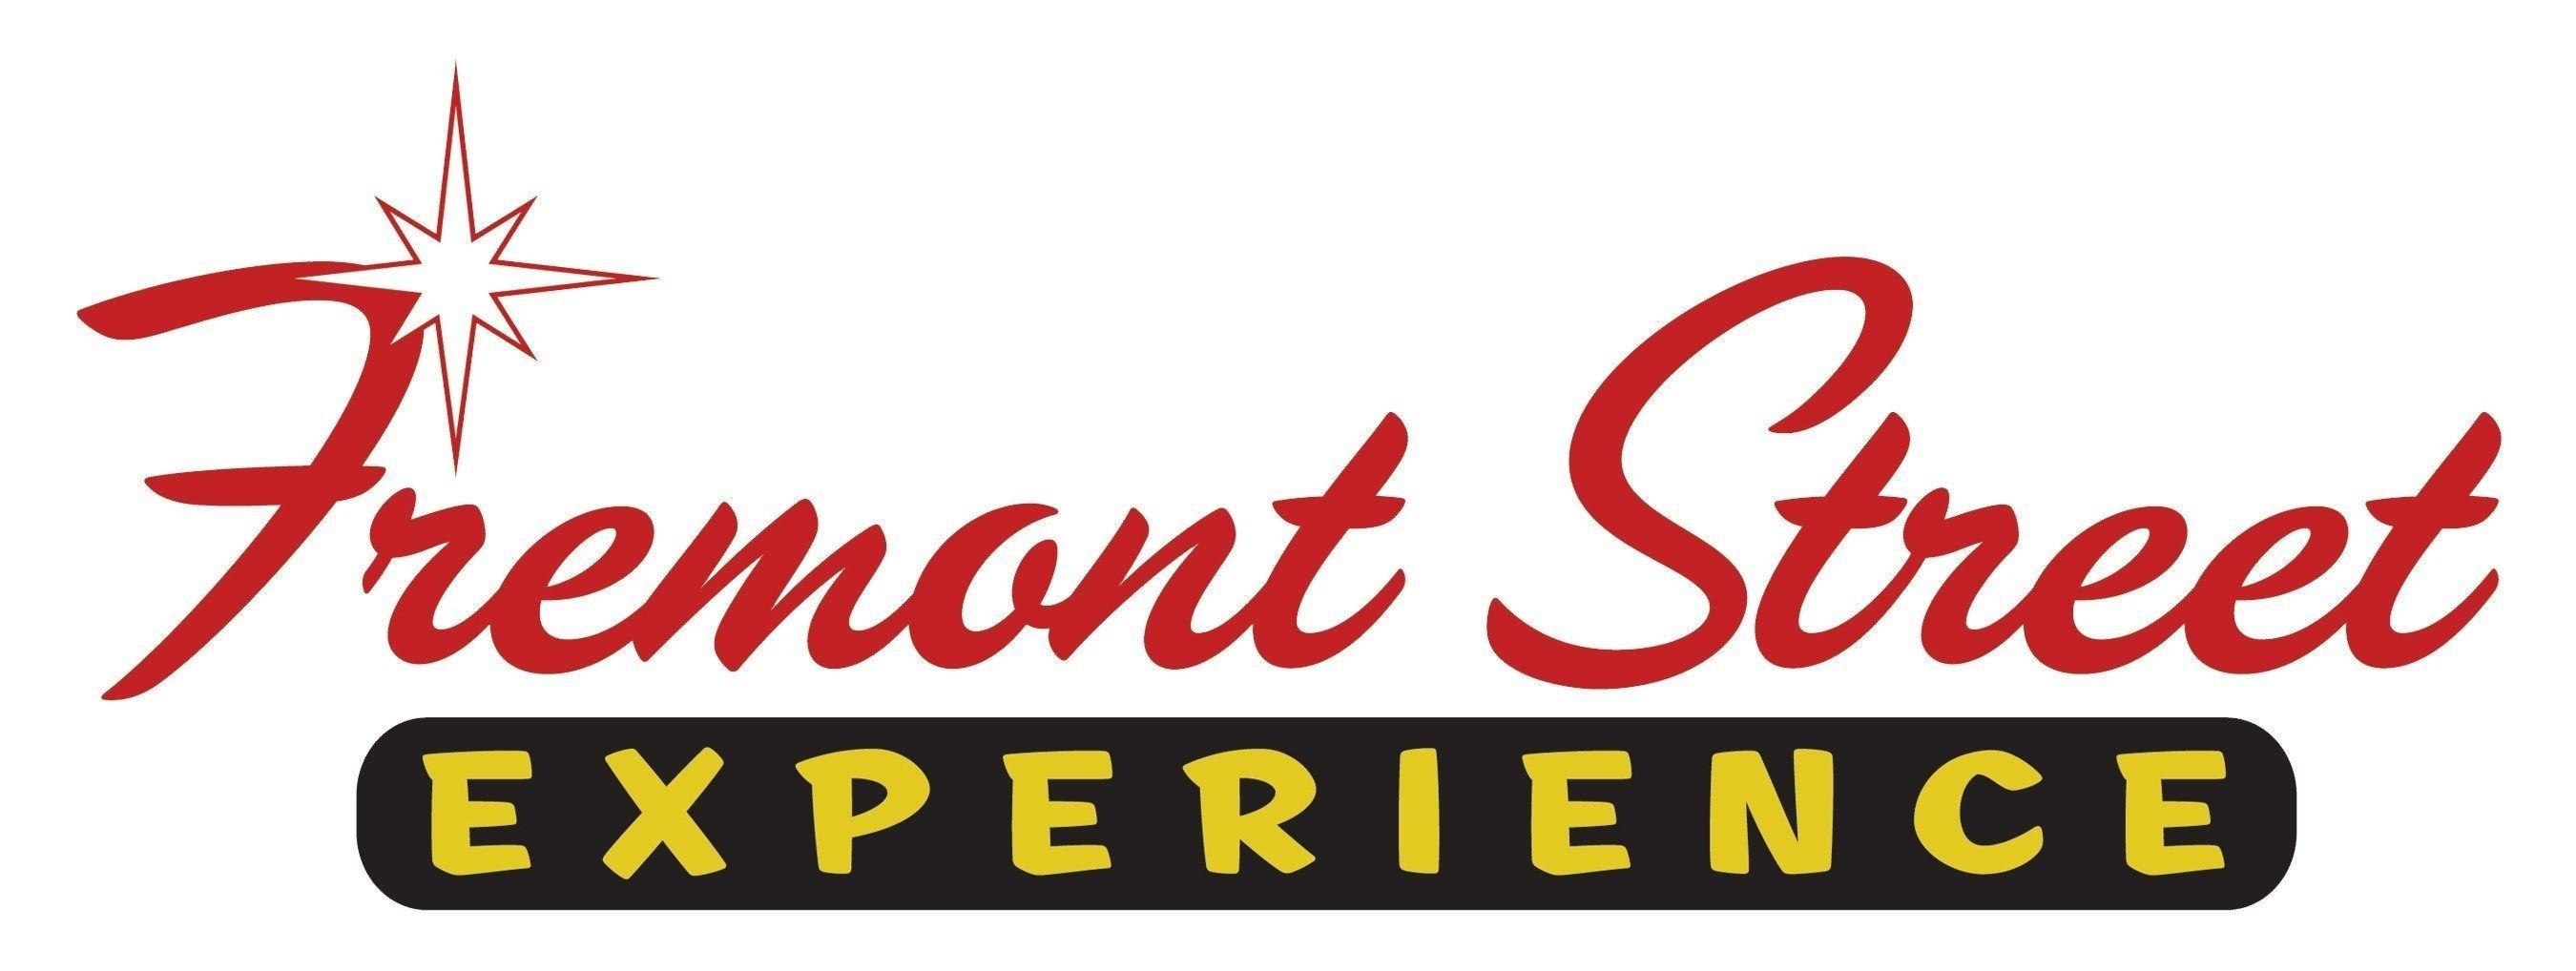 Fremont Street Logo - Toast the New Year at Fremont Street Experience with Downtown ...